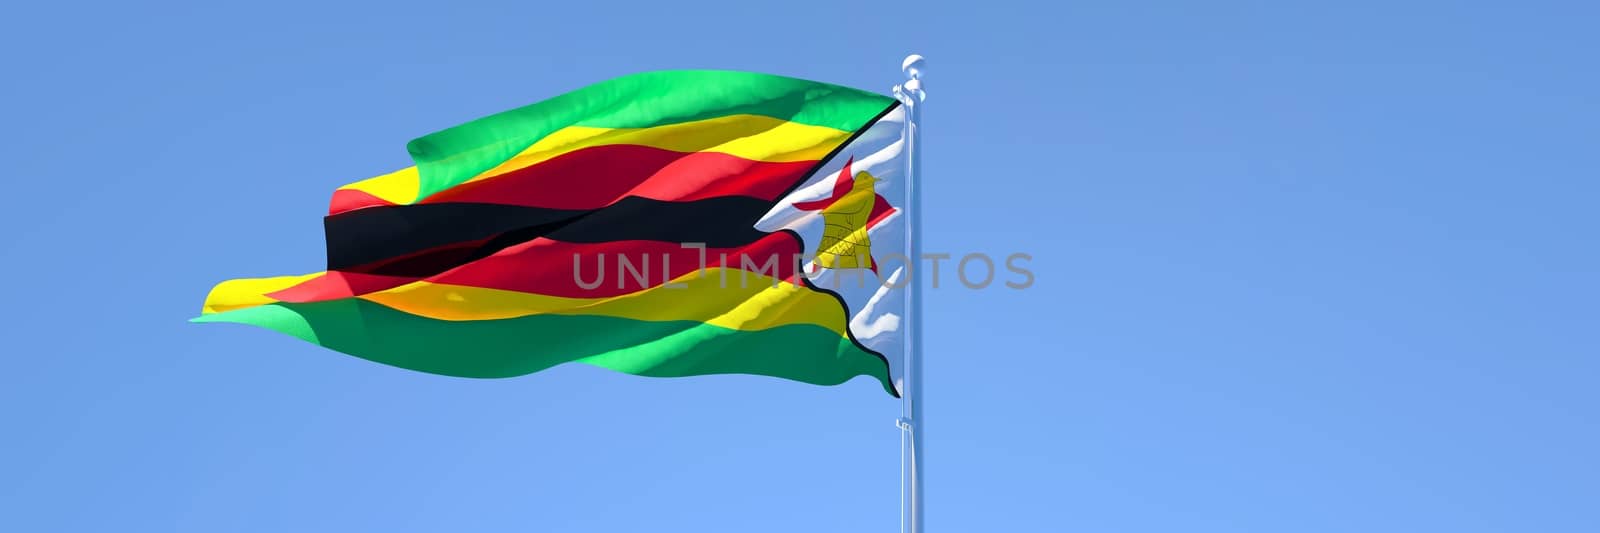 3D rendering of the national flag of Zimbabwe waving in the wind against a blue sky